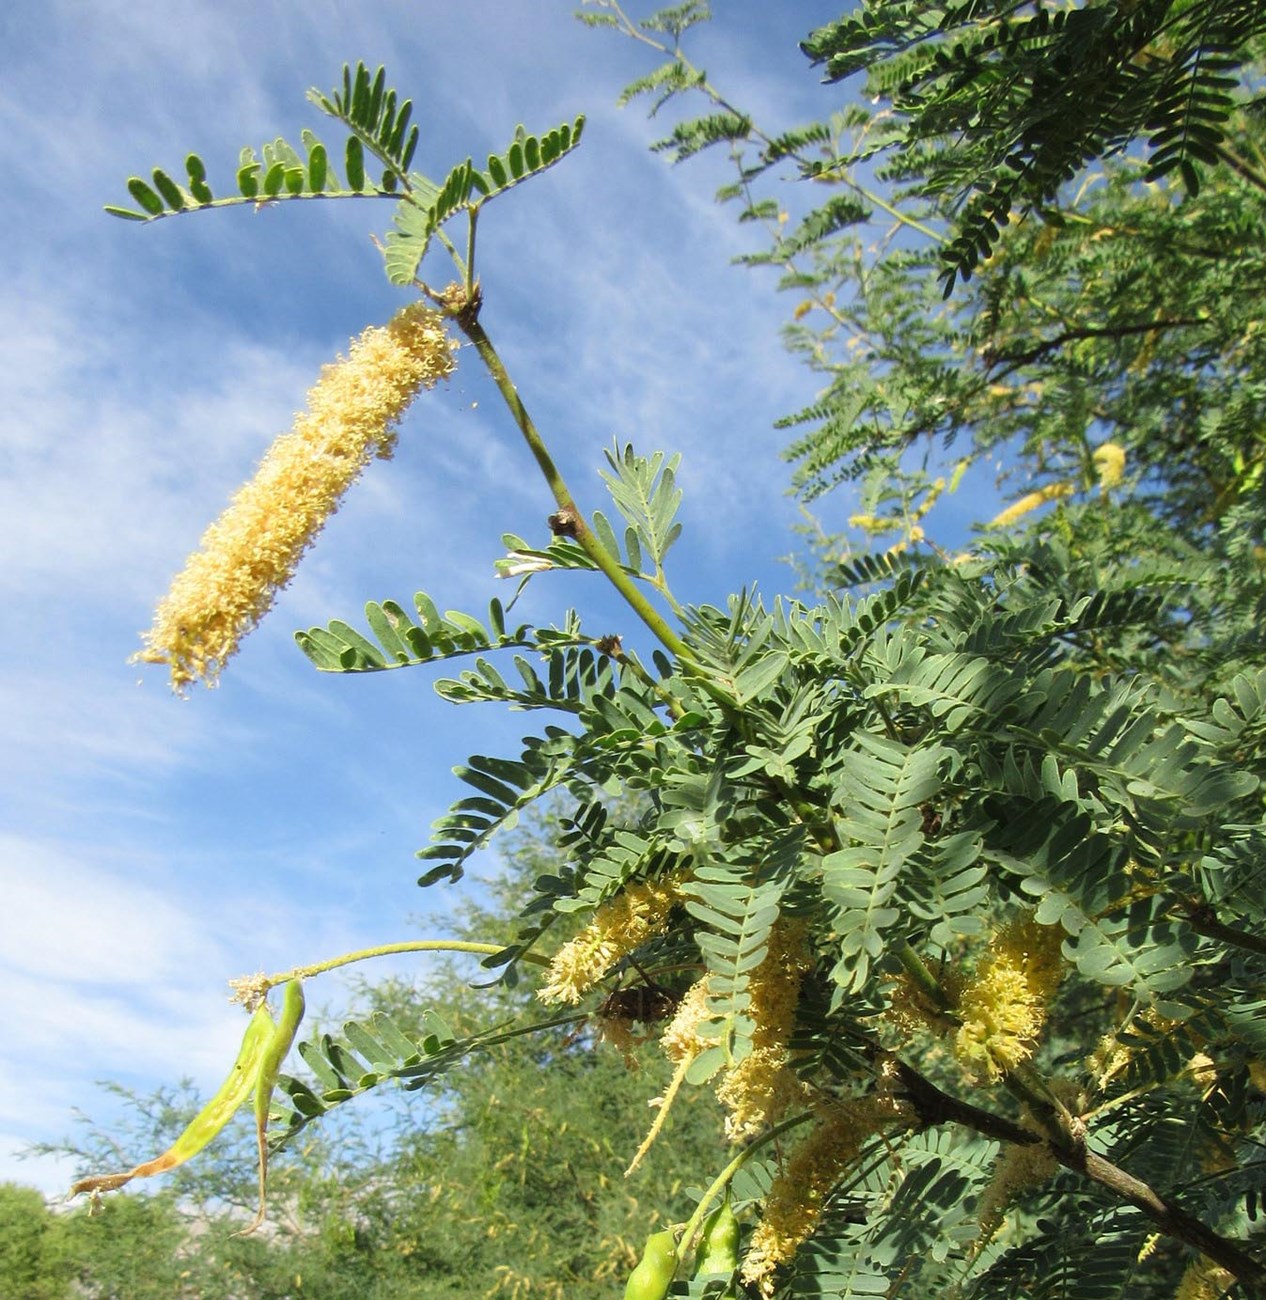 Close up of mesquite reproductive structures called catkins. They are oblong clusters of small yellowish flowers.